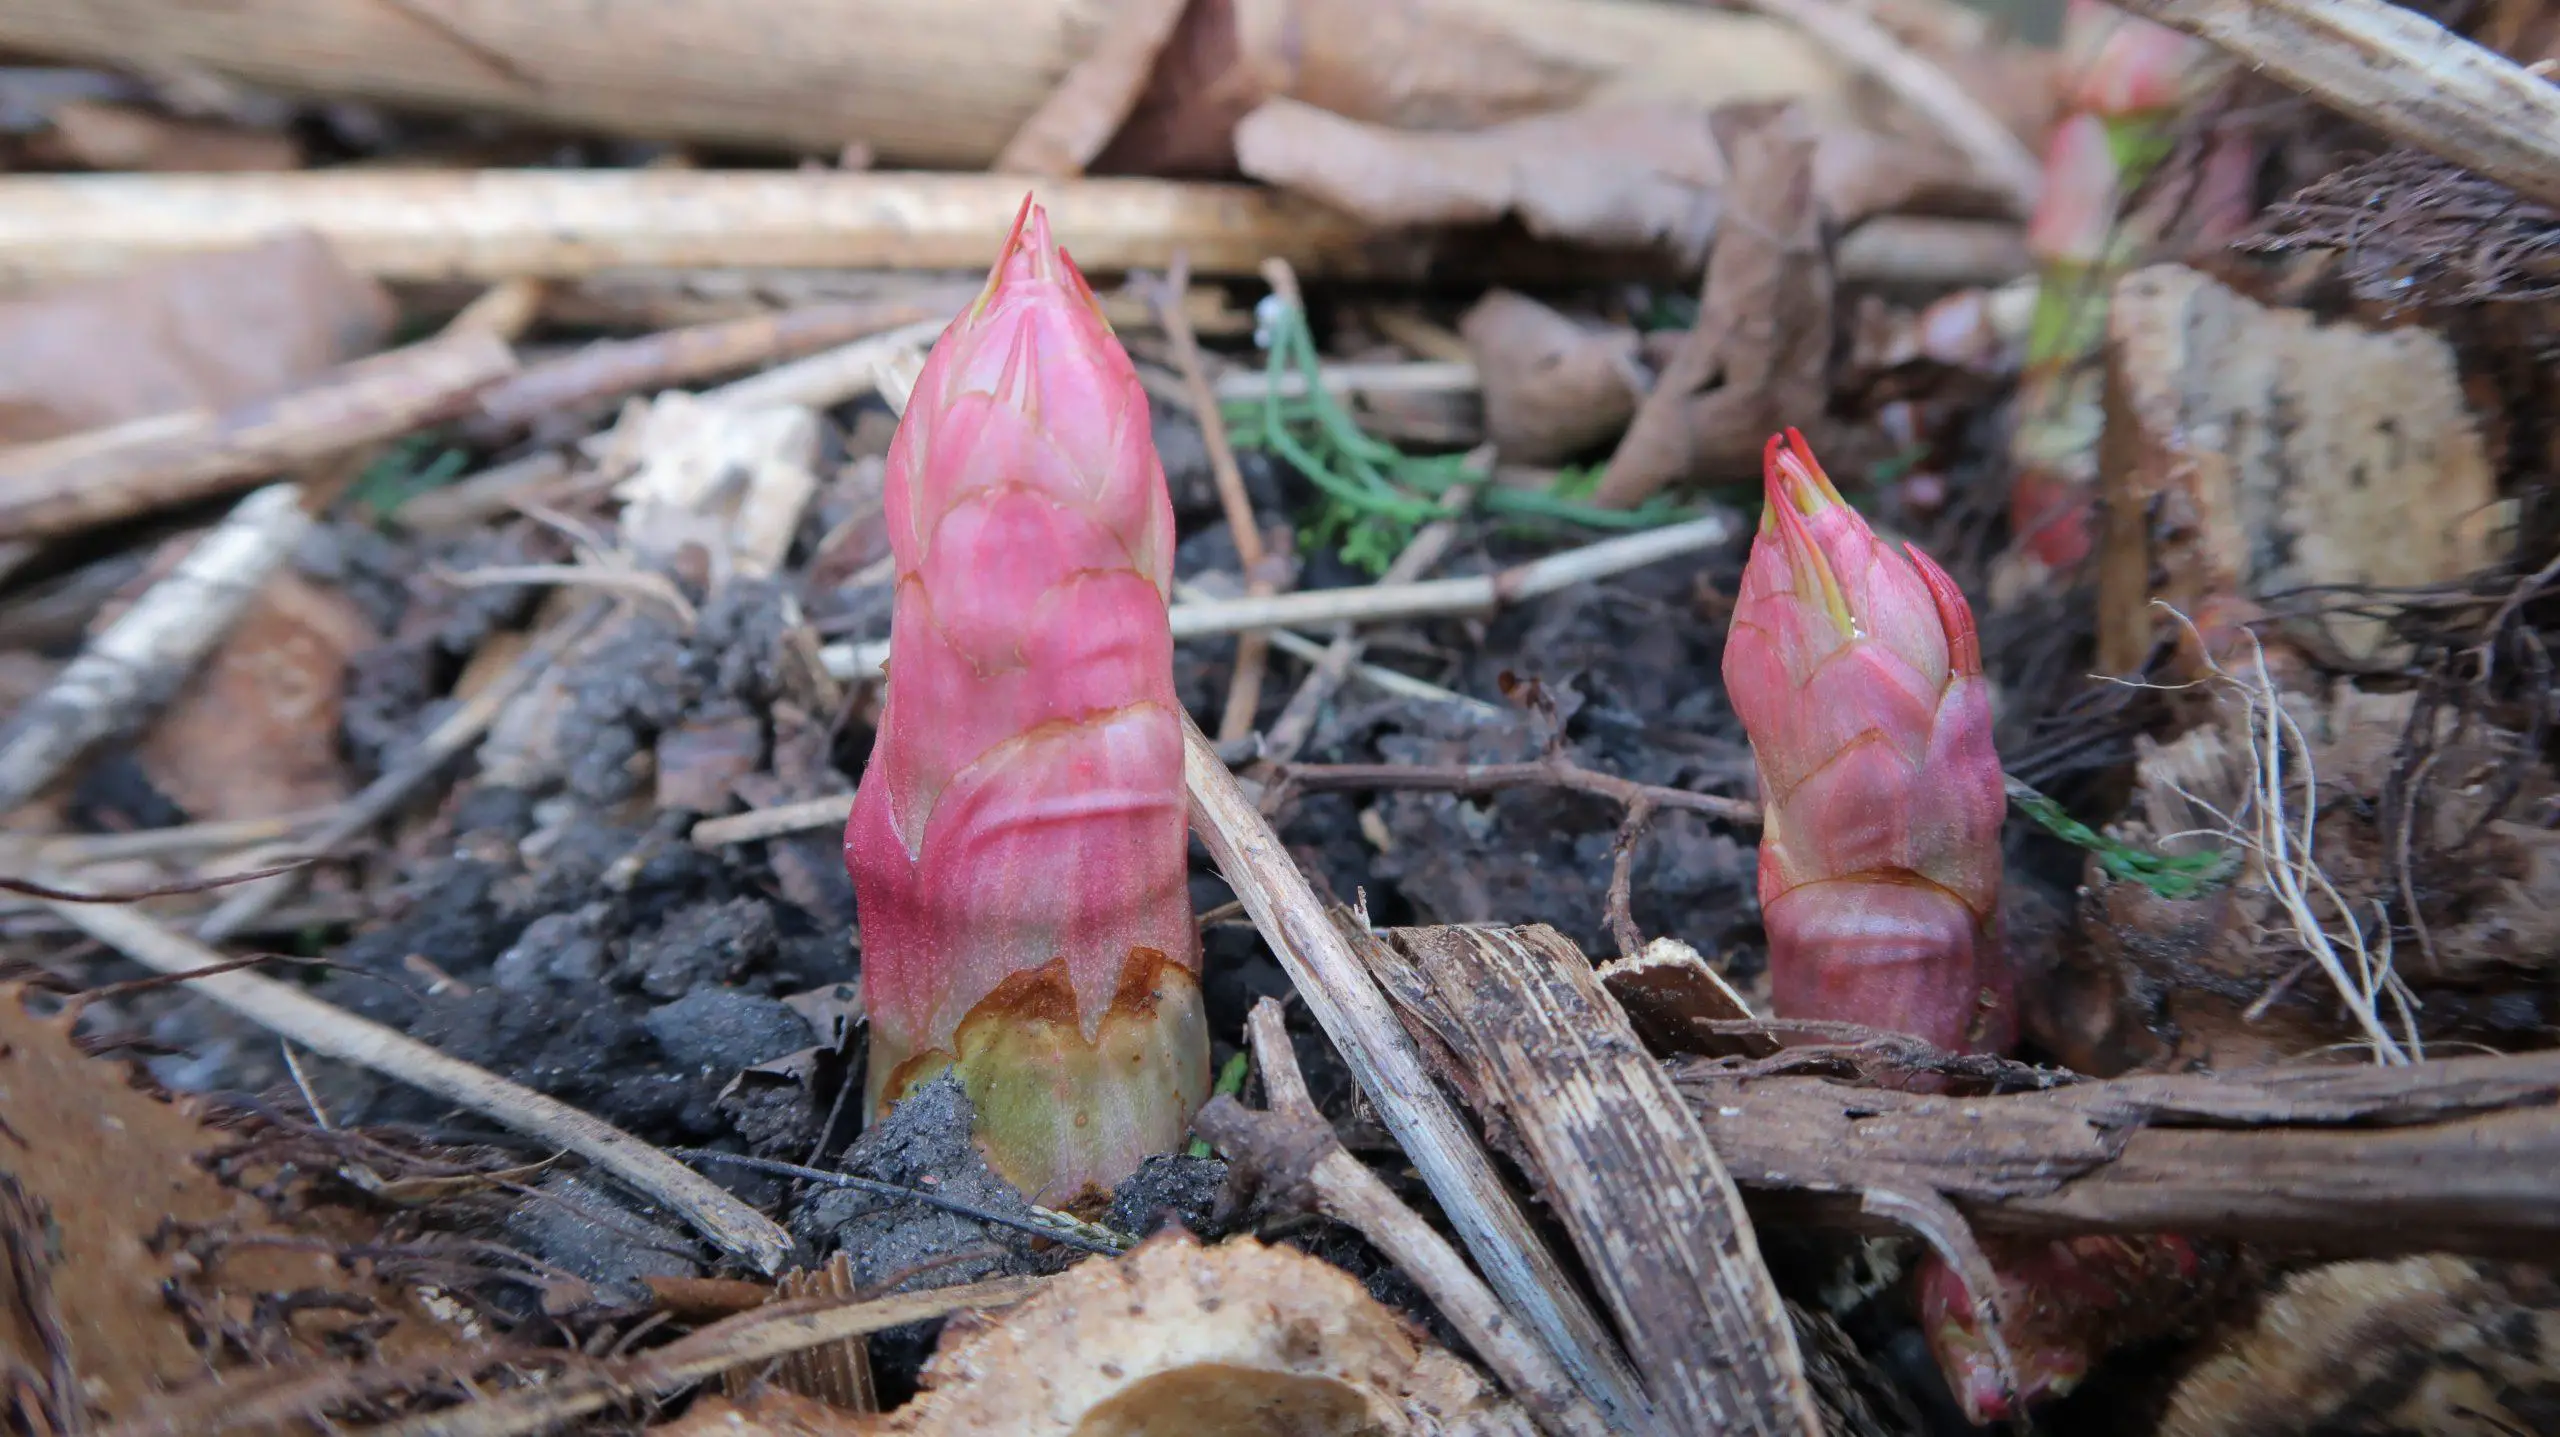 Identifying the Japanese knotweed buds with their distinctive tip and flesh coloured stem